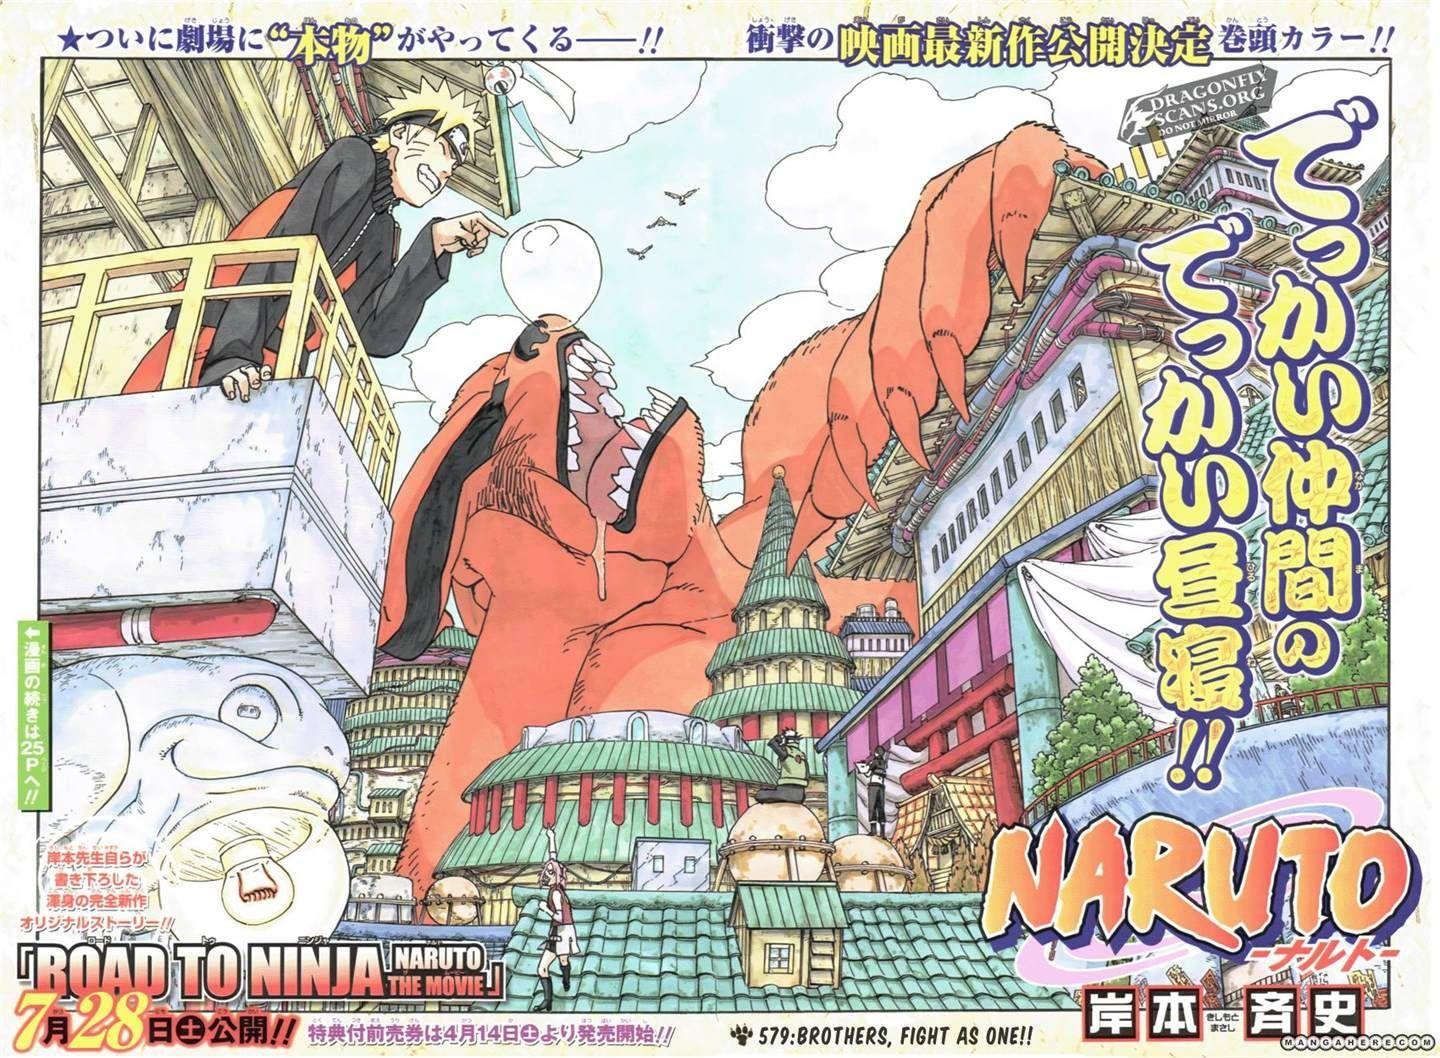 Vol.61 Chapter 579 – Brothers, Fight Together!! | 1 page